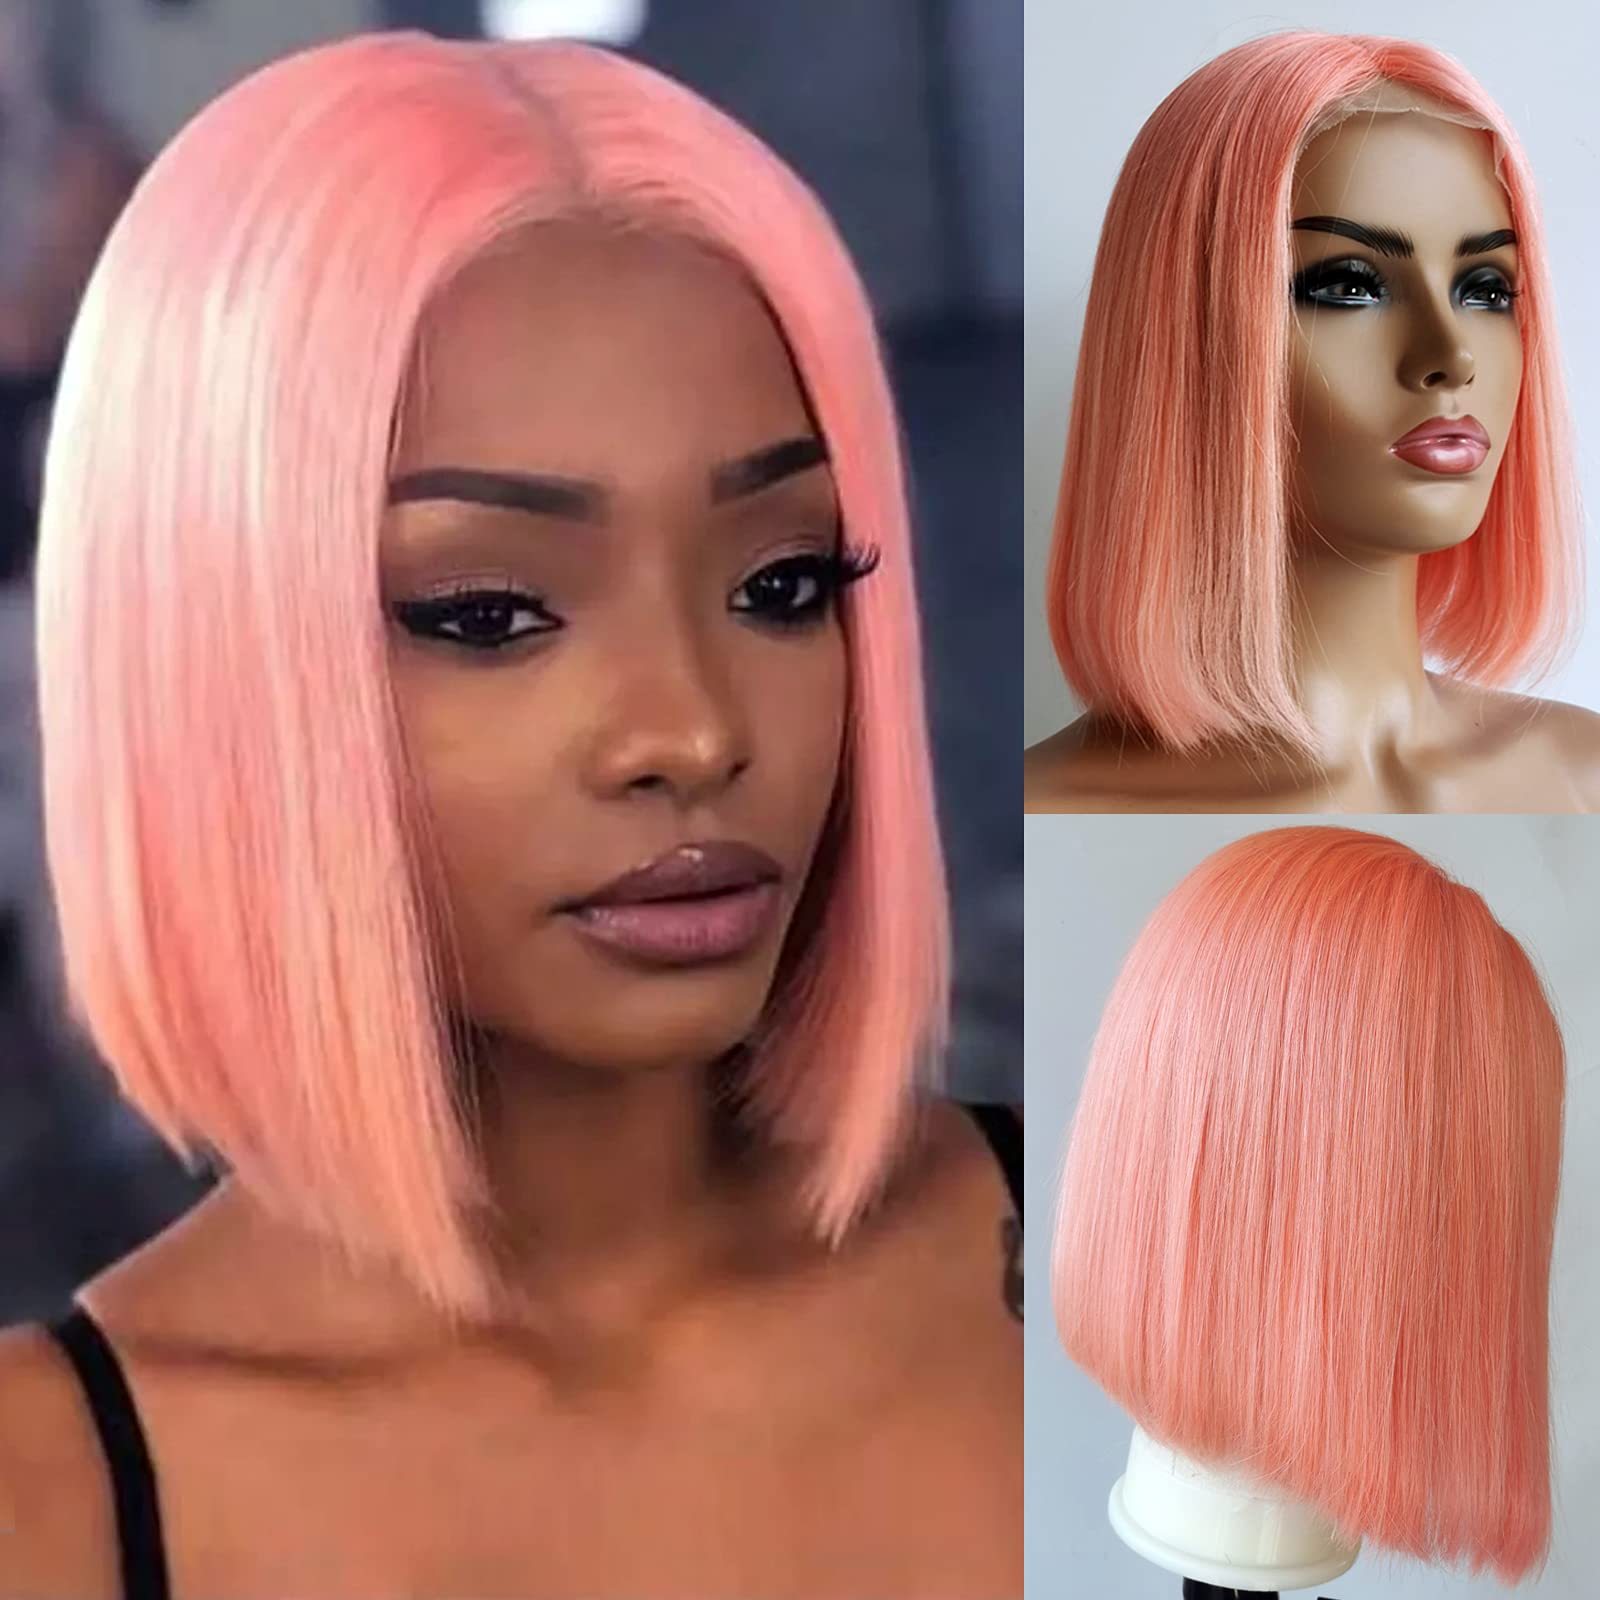 Real Human Hair Bob Wigs, Glueless Lace Front Wig, Pre Plucked with Baby Hair, Short Pink Colored Bob, for Black Women, 10 inch Straight 150% Densi...